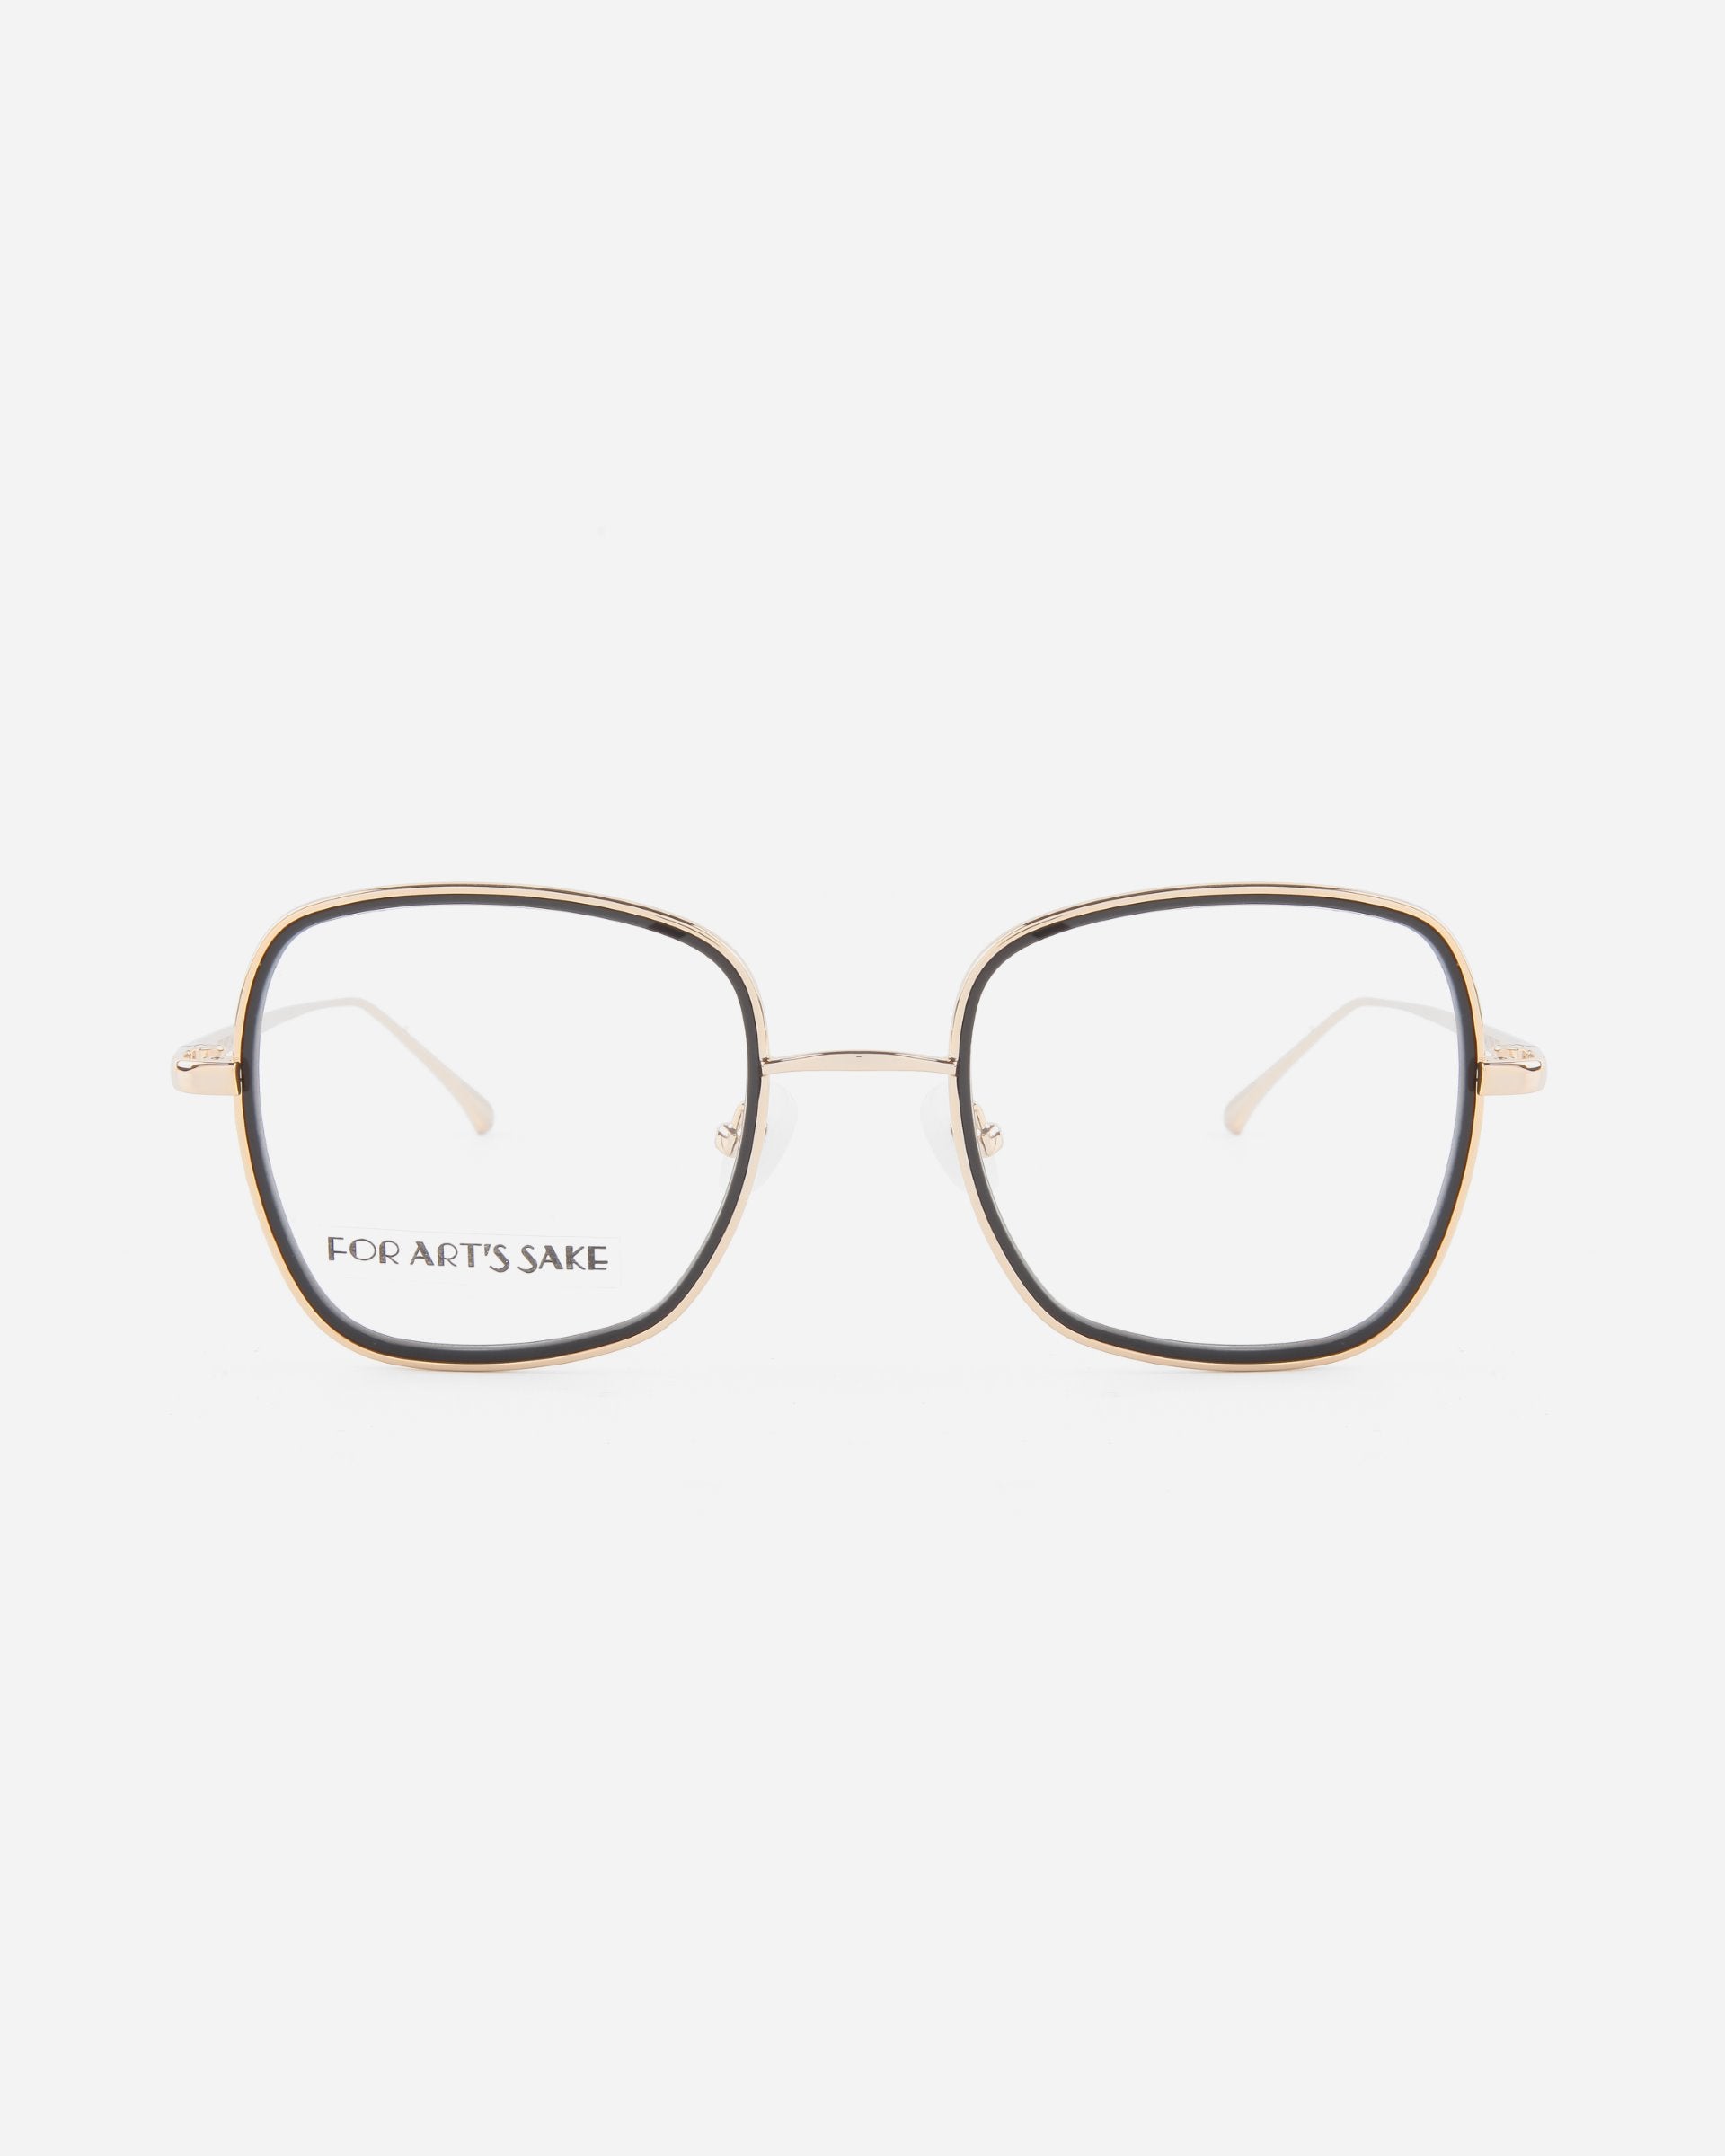 A pair of square-shaped, thin-framed eyeglasses with a gold metal frame and clear ultra-lightweight lenses. The brand name &quot;For Art&#39;s Sake®&quot; is printed on the inside of the left lens. The product name &quot;Coconut&quot; is associated with this stylish accessory. The background is plain white.